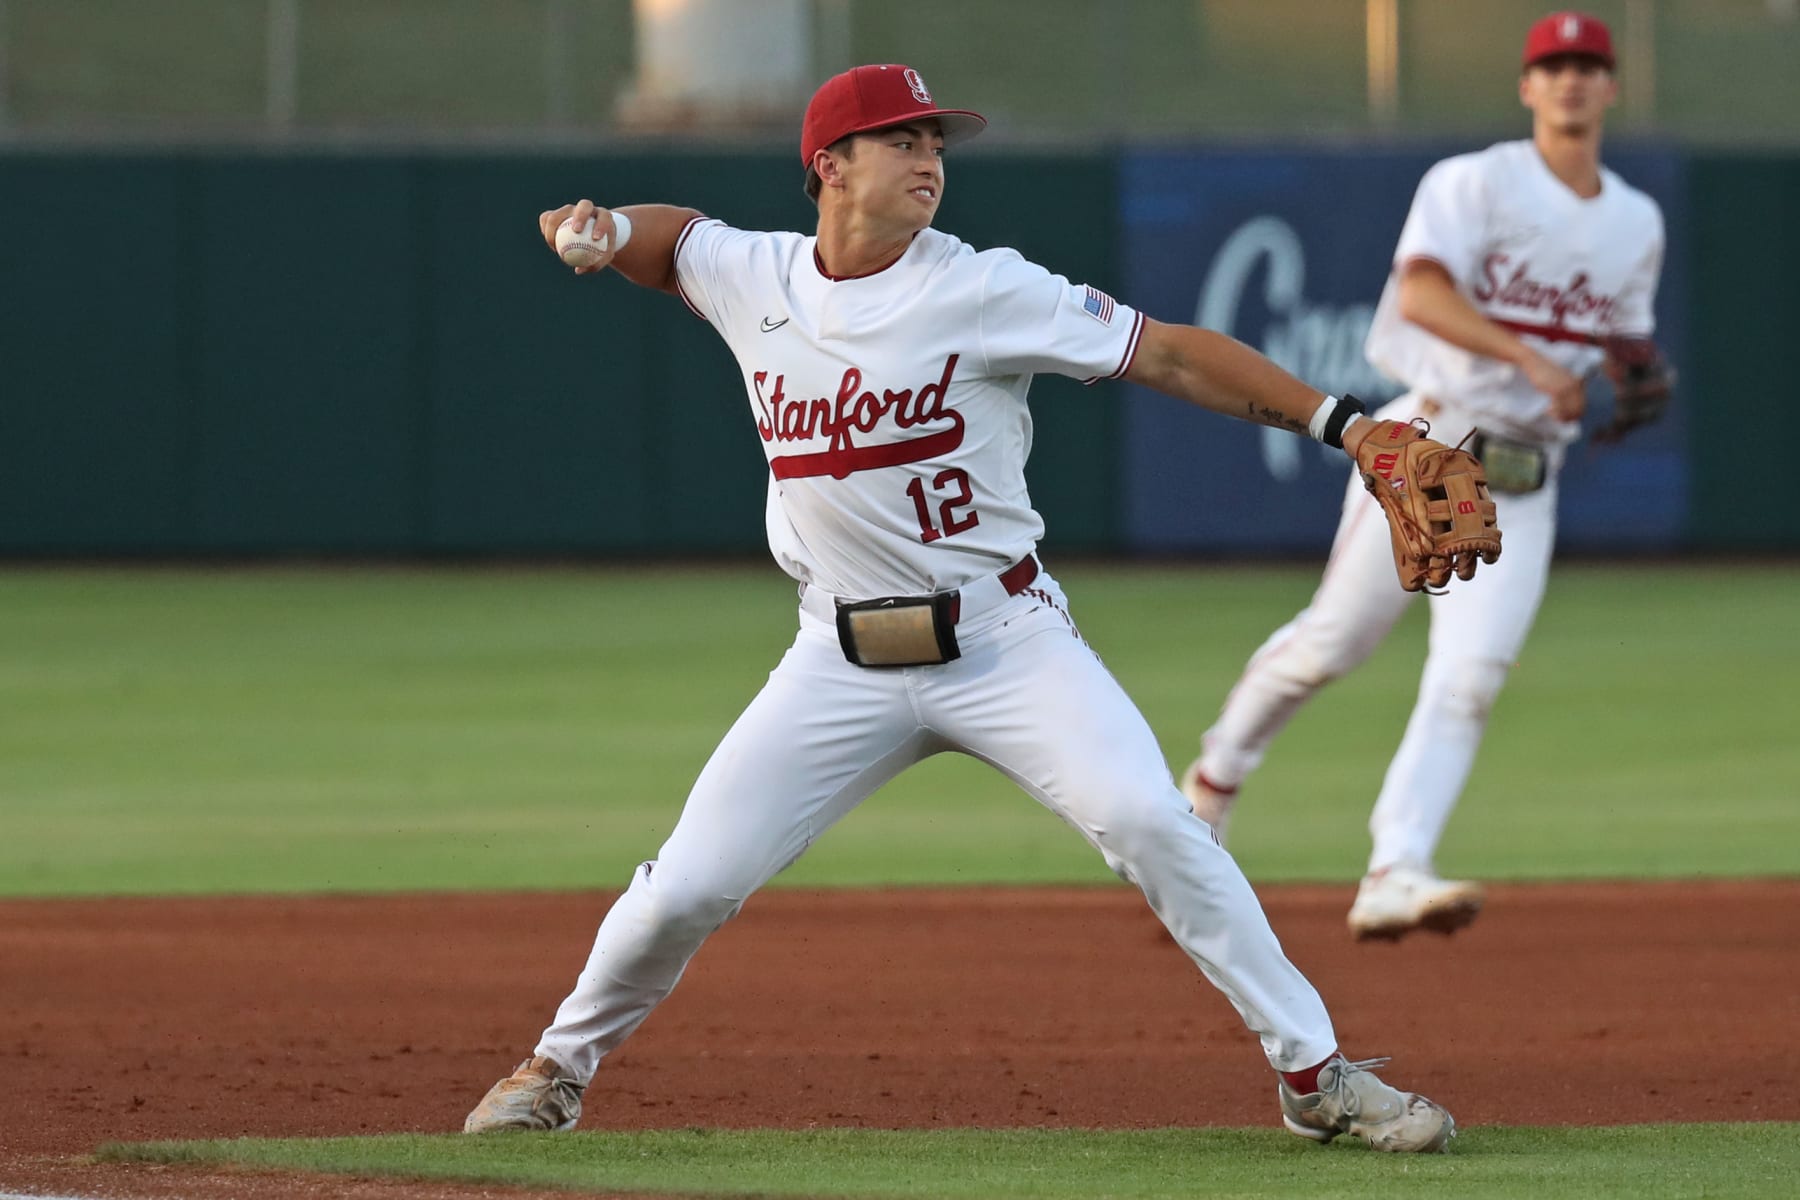 Stanford Baseball: The 2020 MLB Draft brings uncertainty to Palo